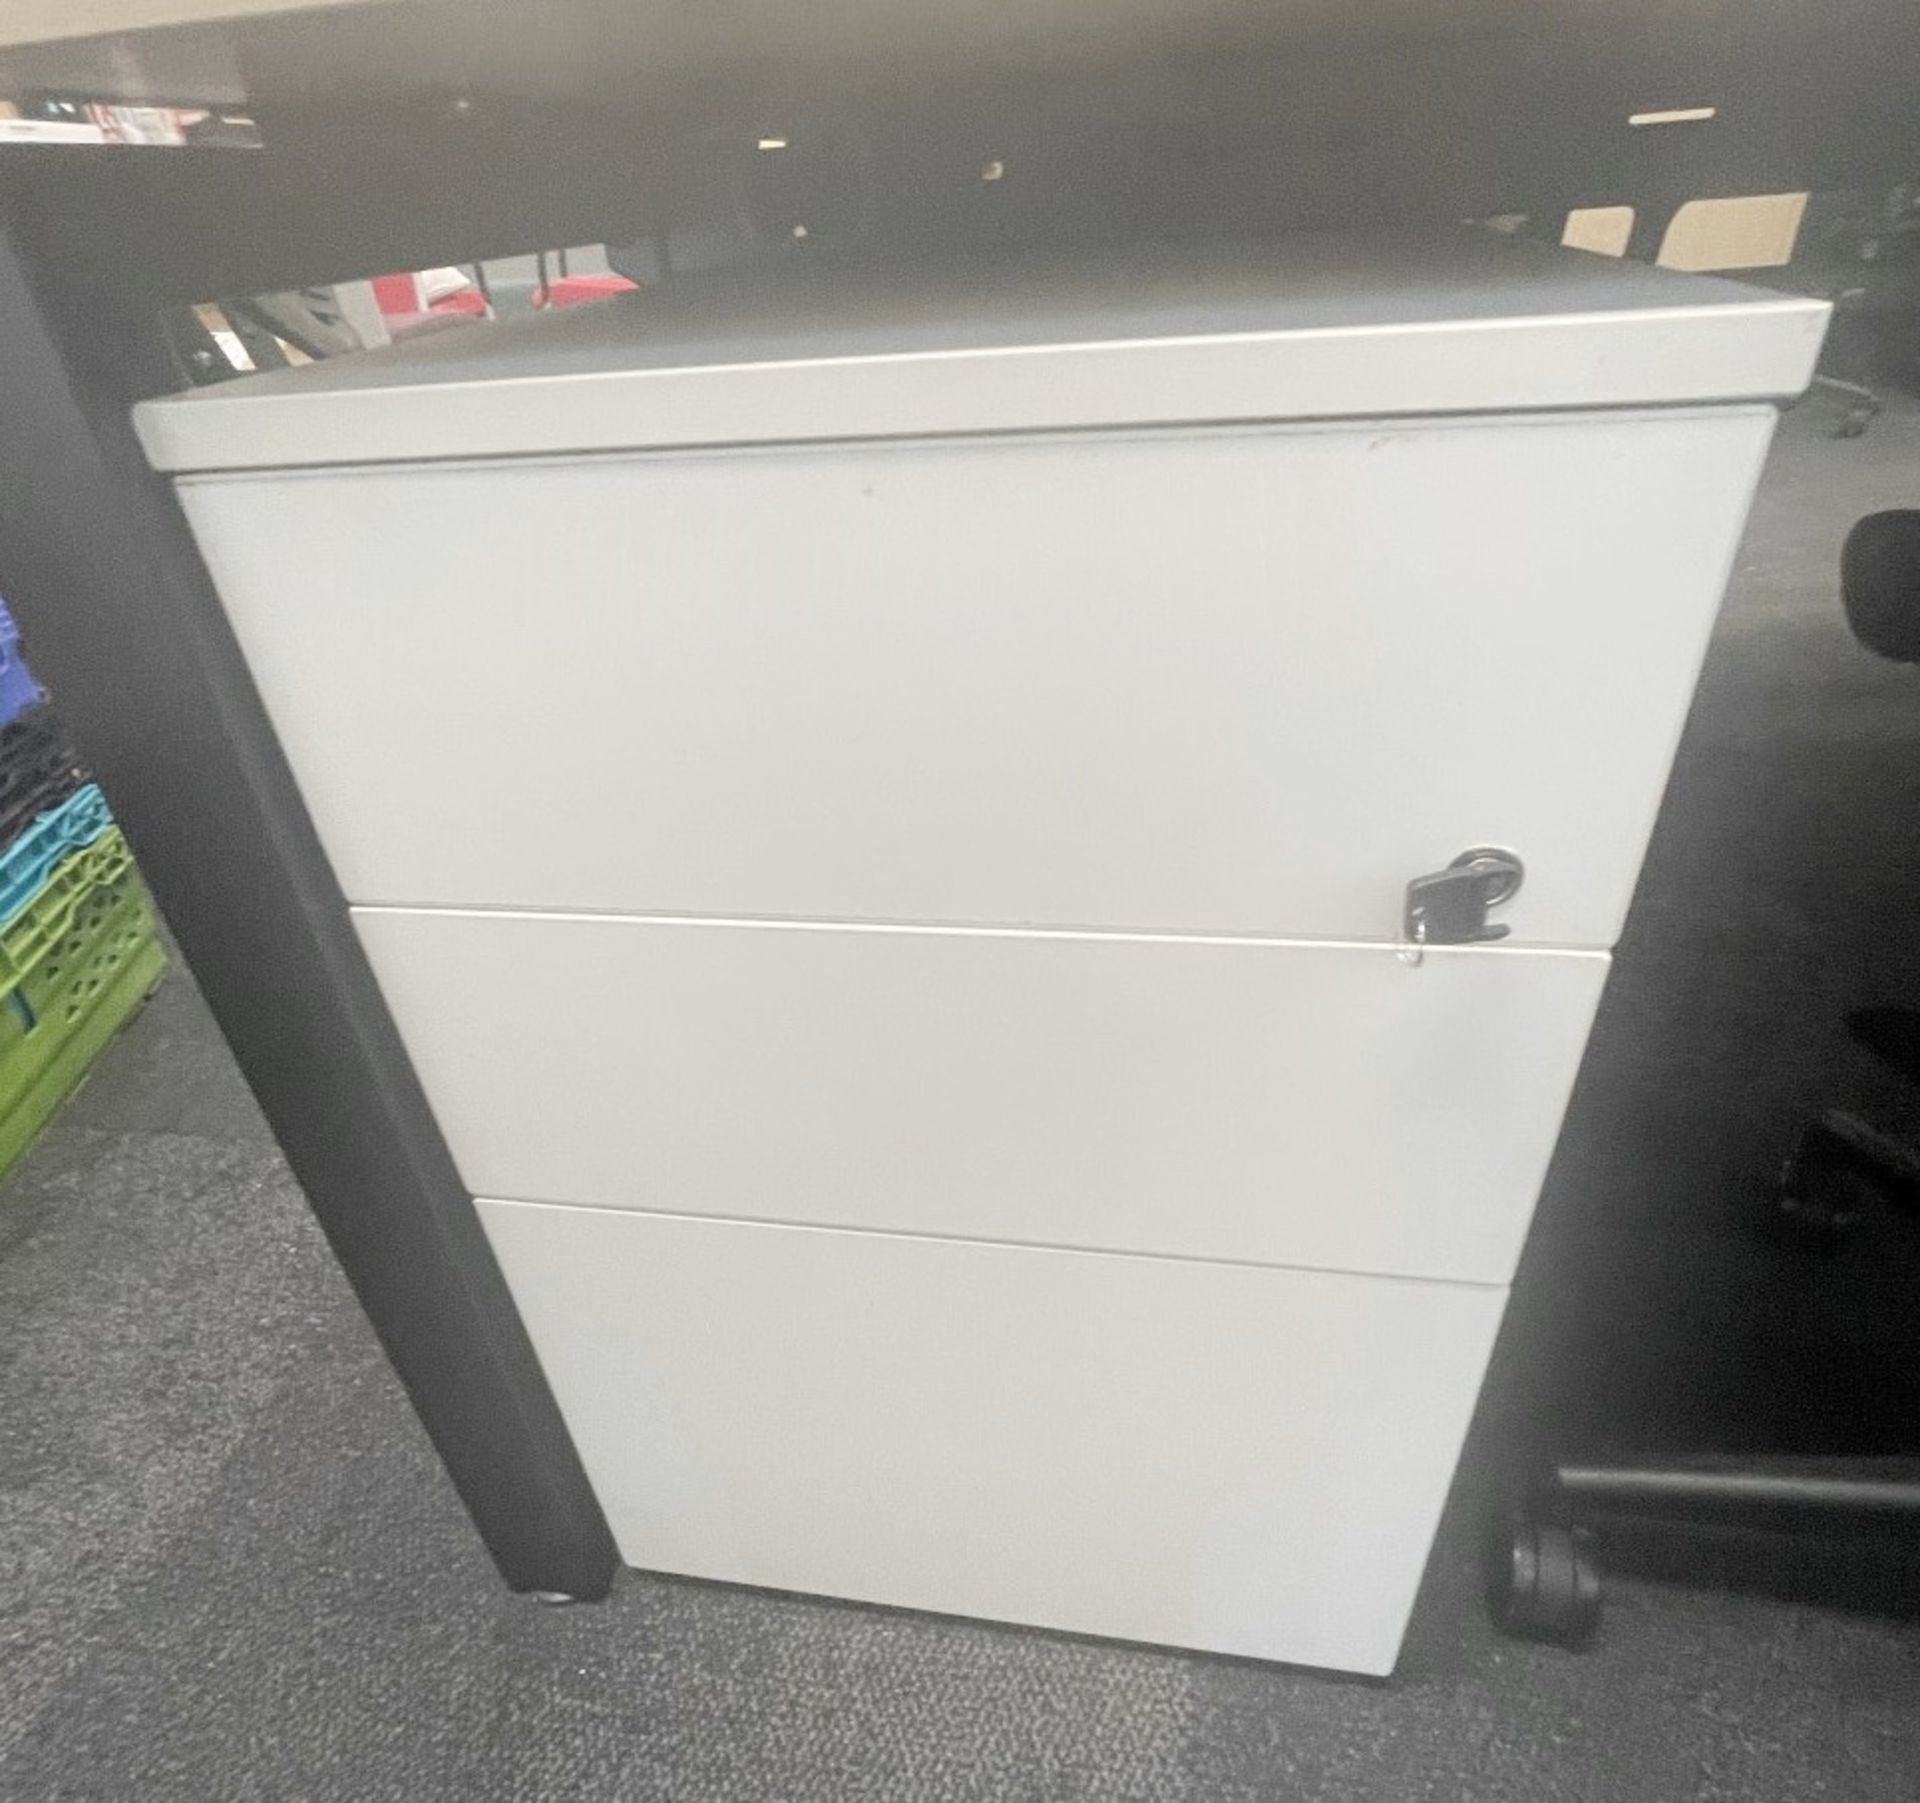 8 x Lockerble Under-Desk 3-Drawer Pedestals - To Be Removed From An Executive Office Environment - Image 3 of 6